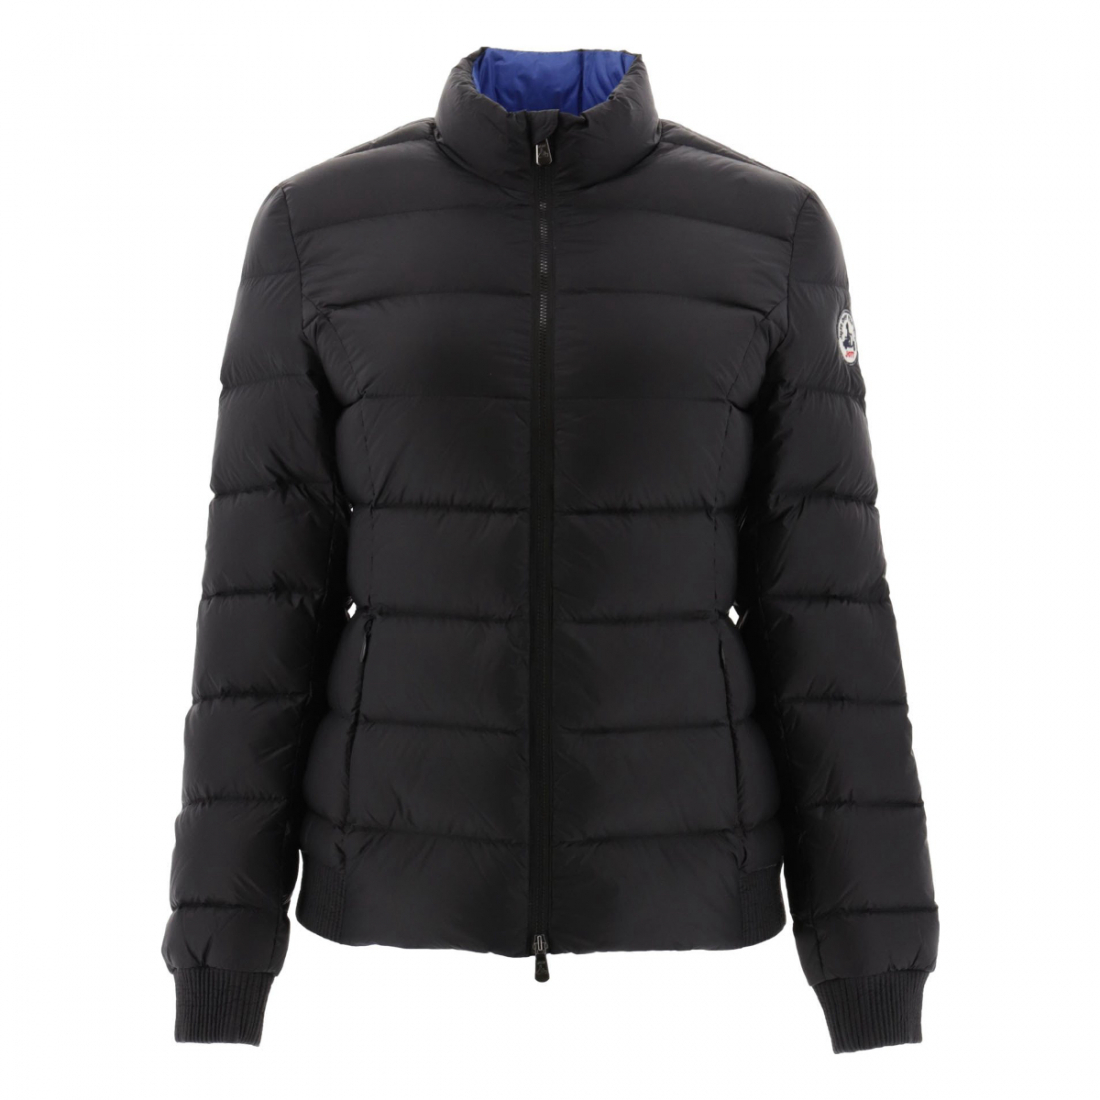 Women's 'Claire' Puffer Jacket